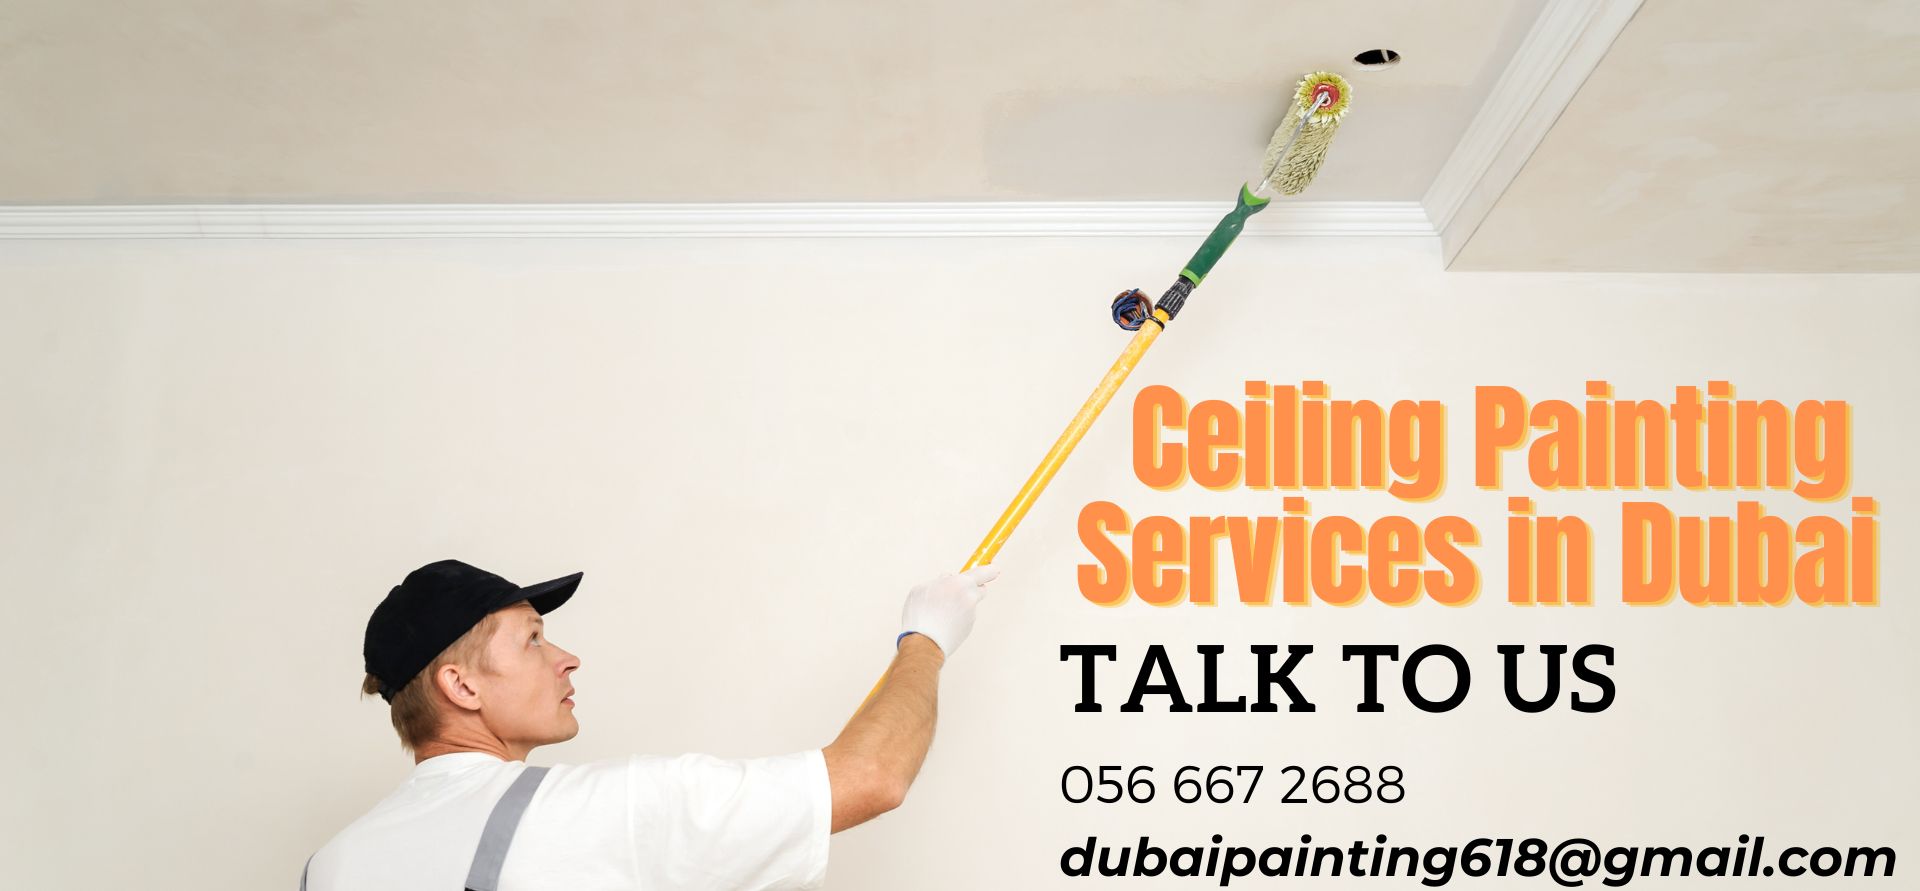 Ceiling Painting Services in Dubai